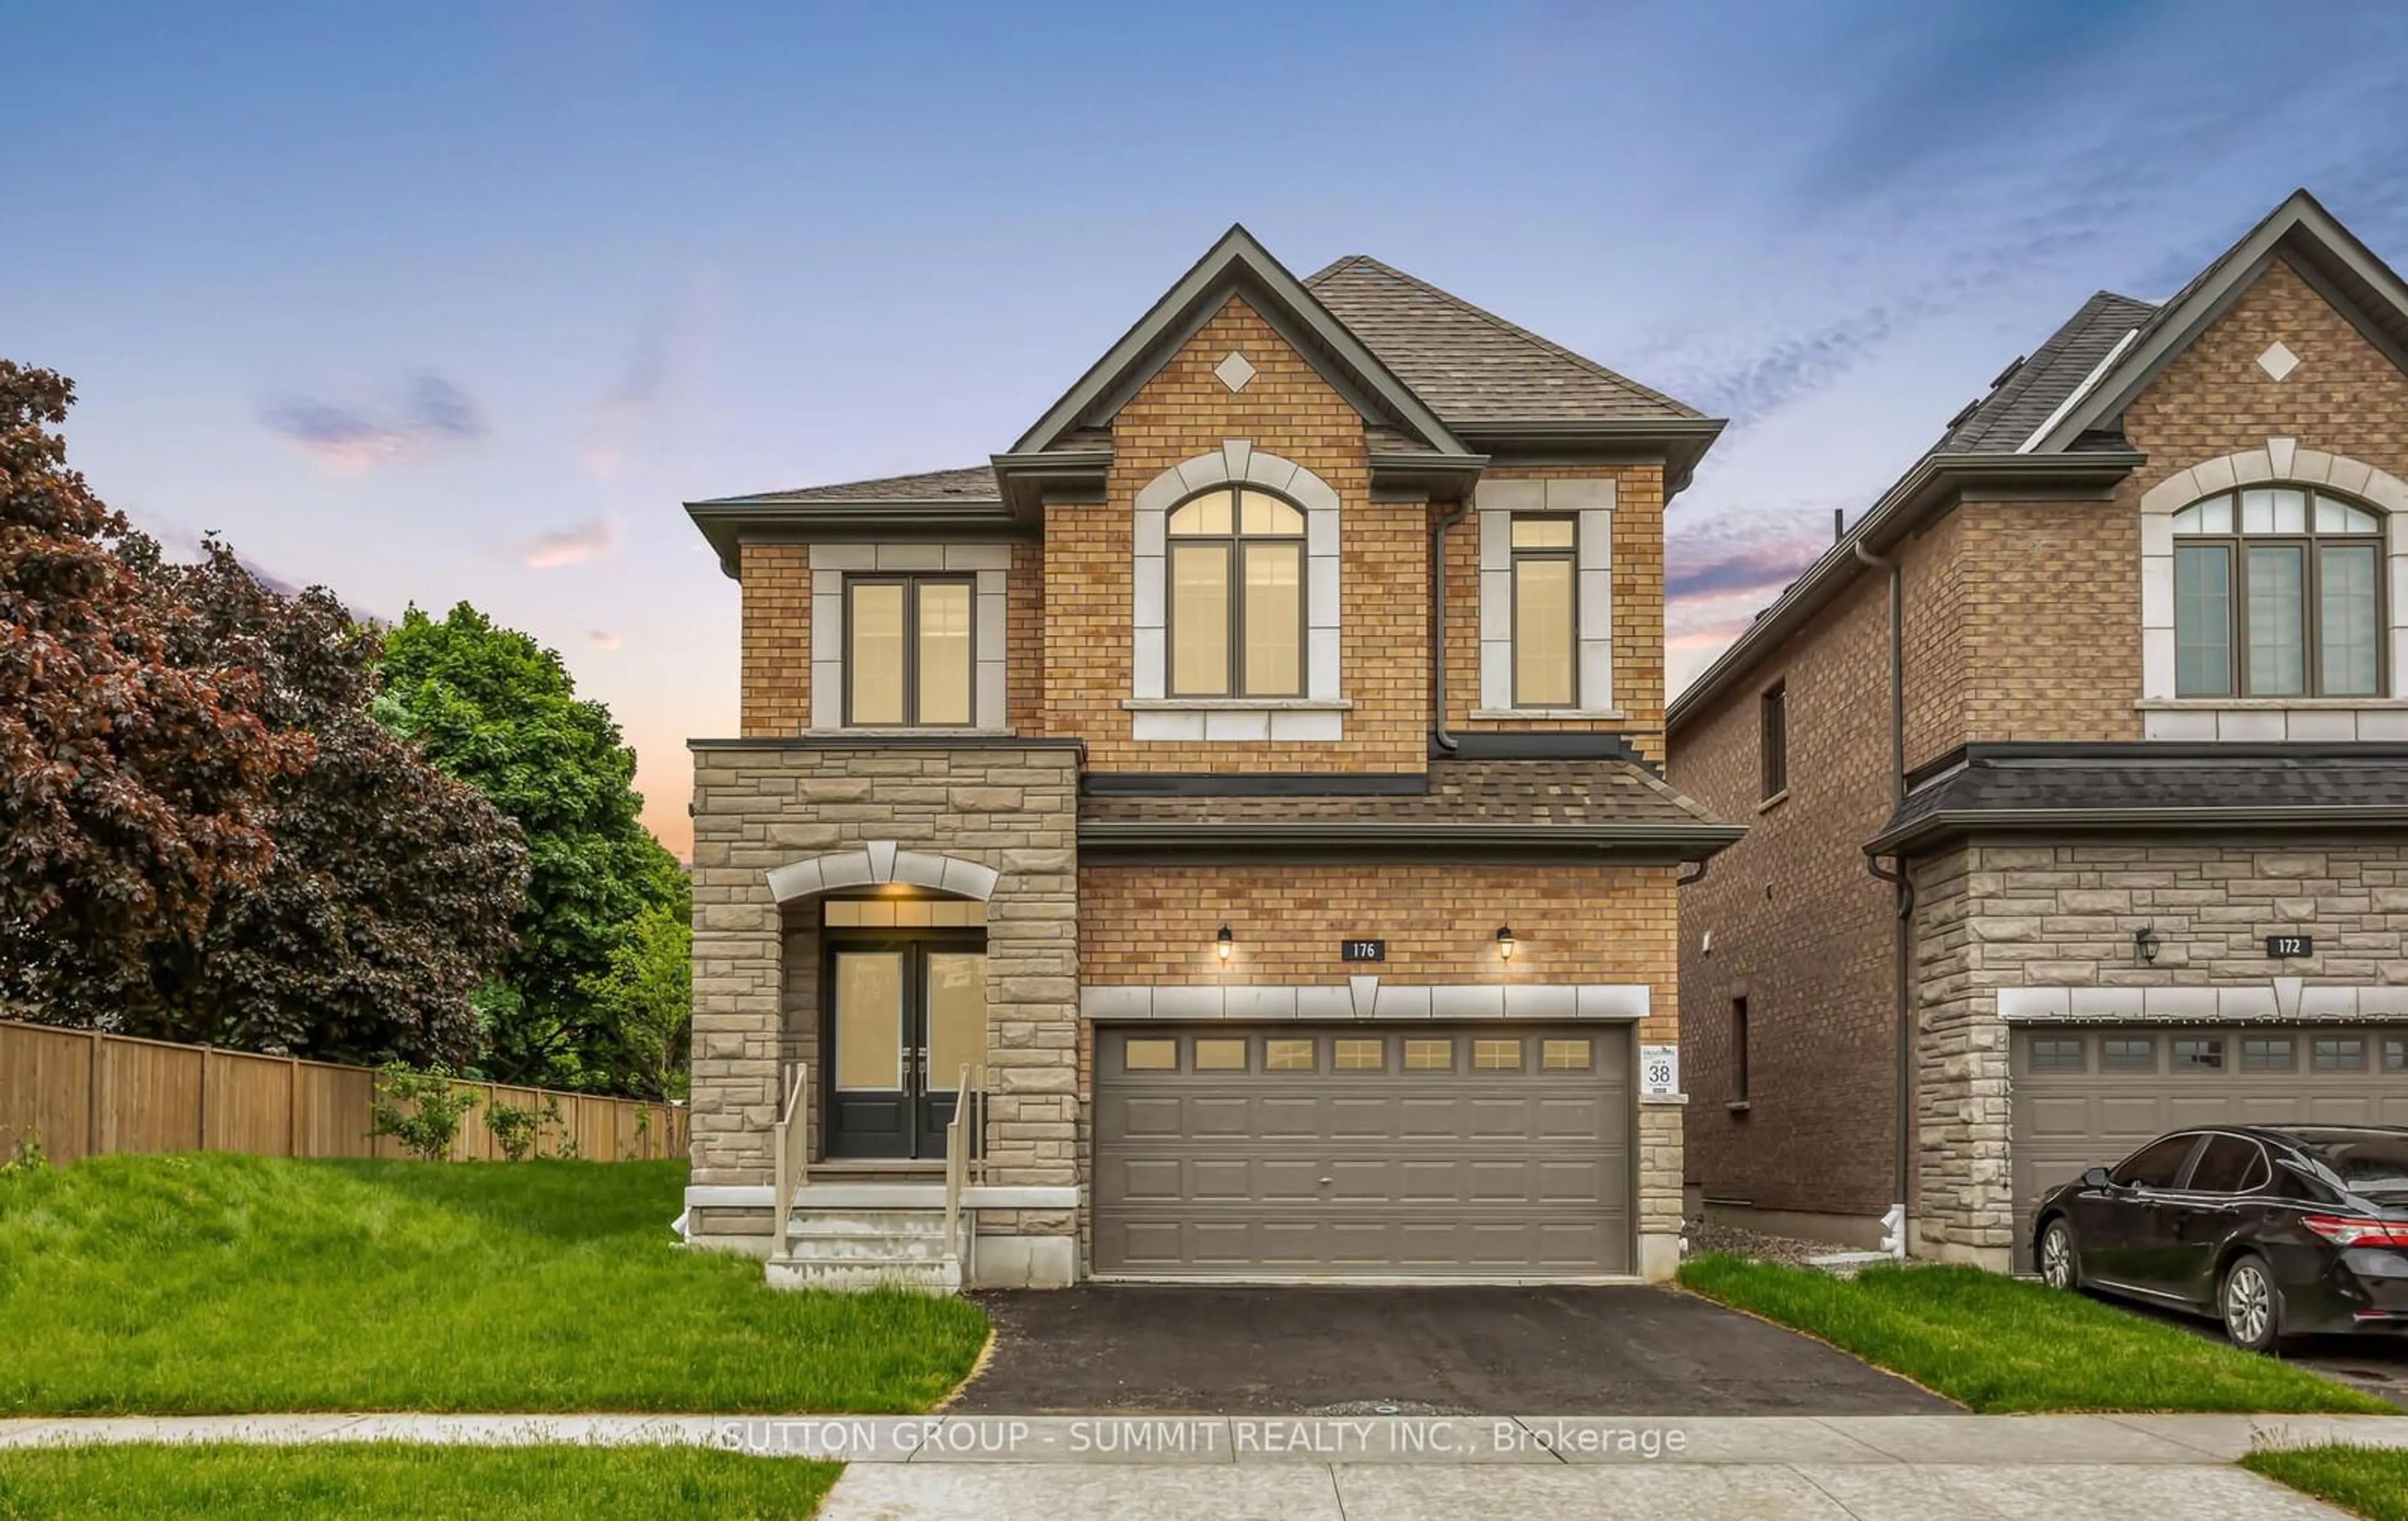 Home with brick exterior material for 176 Lumb Dr, Cambridge Ontario N1T 1P3